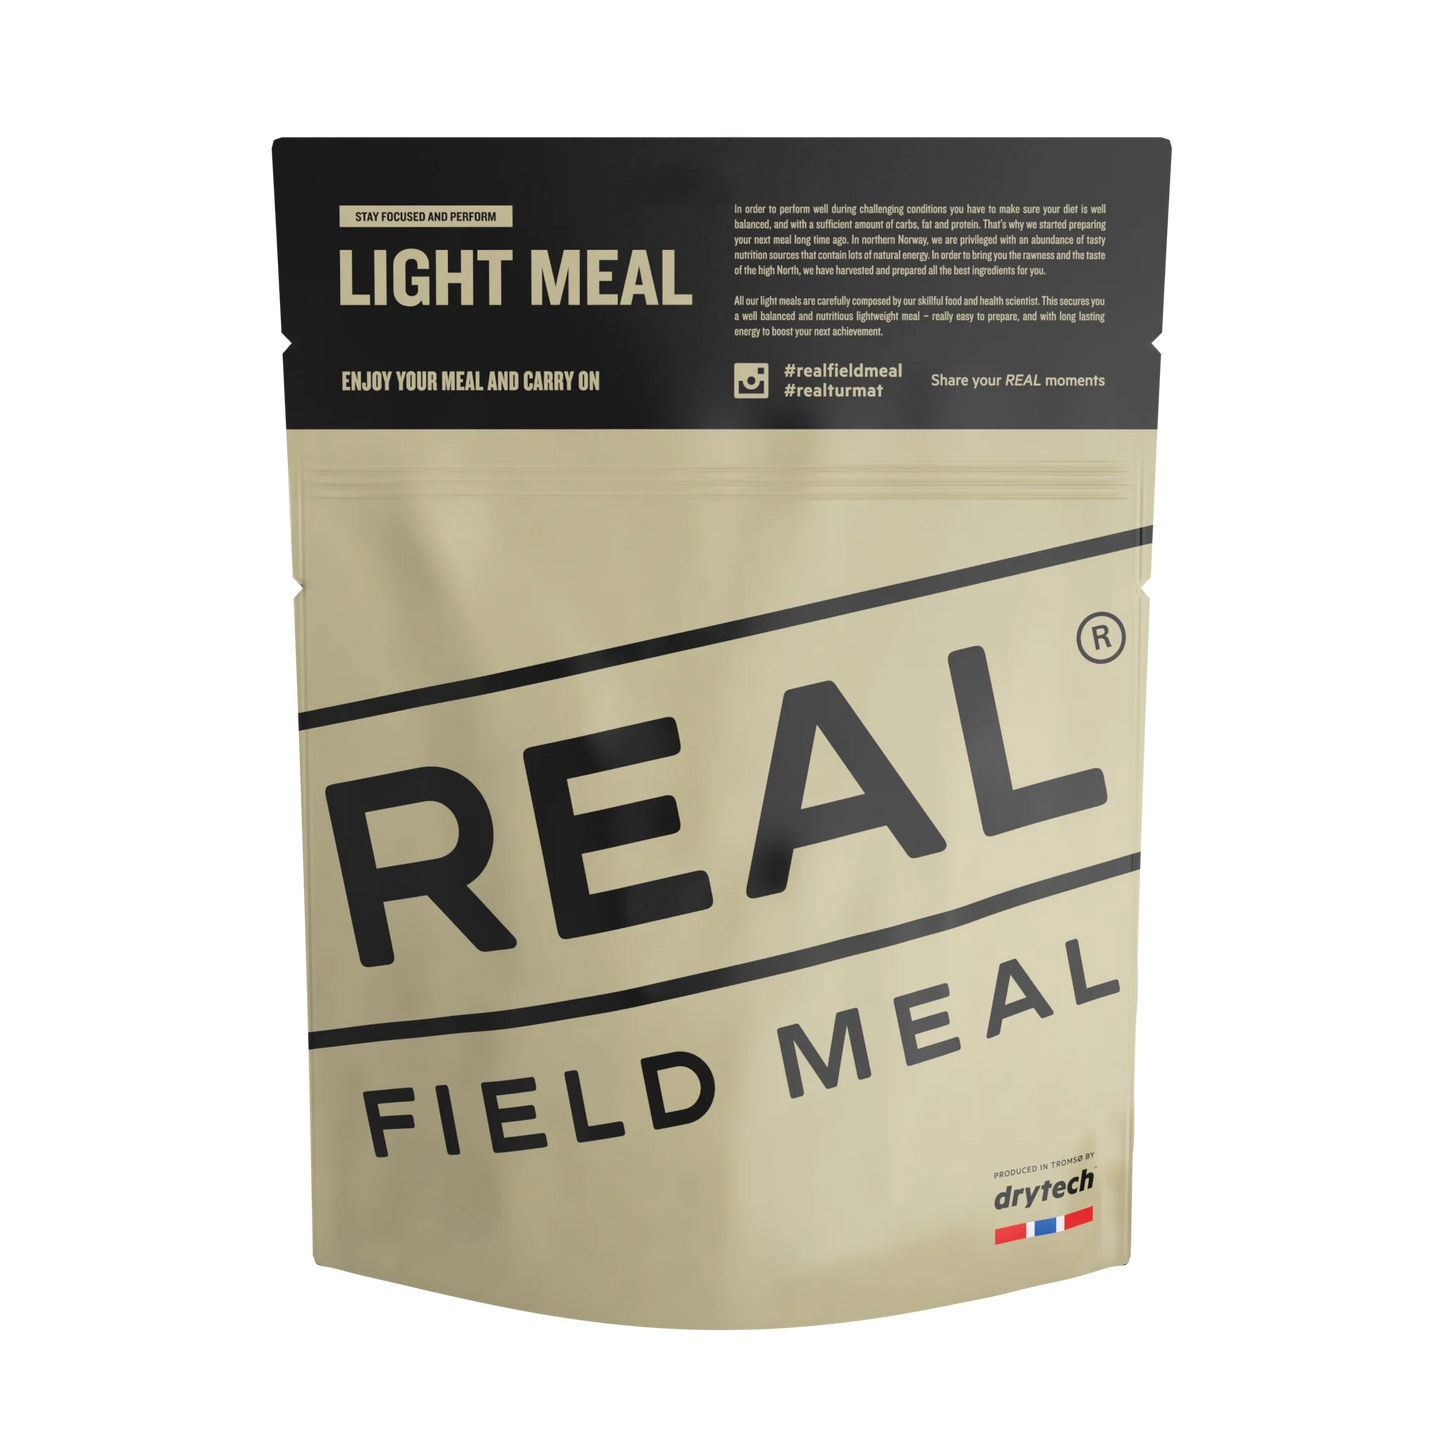 Real Field Meal - Blueberry and Vanilla Muesli (700kcal) Pouches - BULK BUY